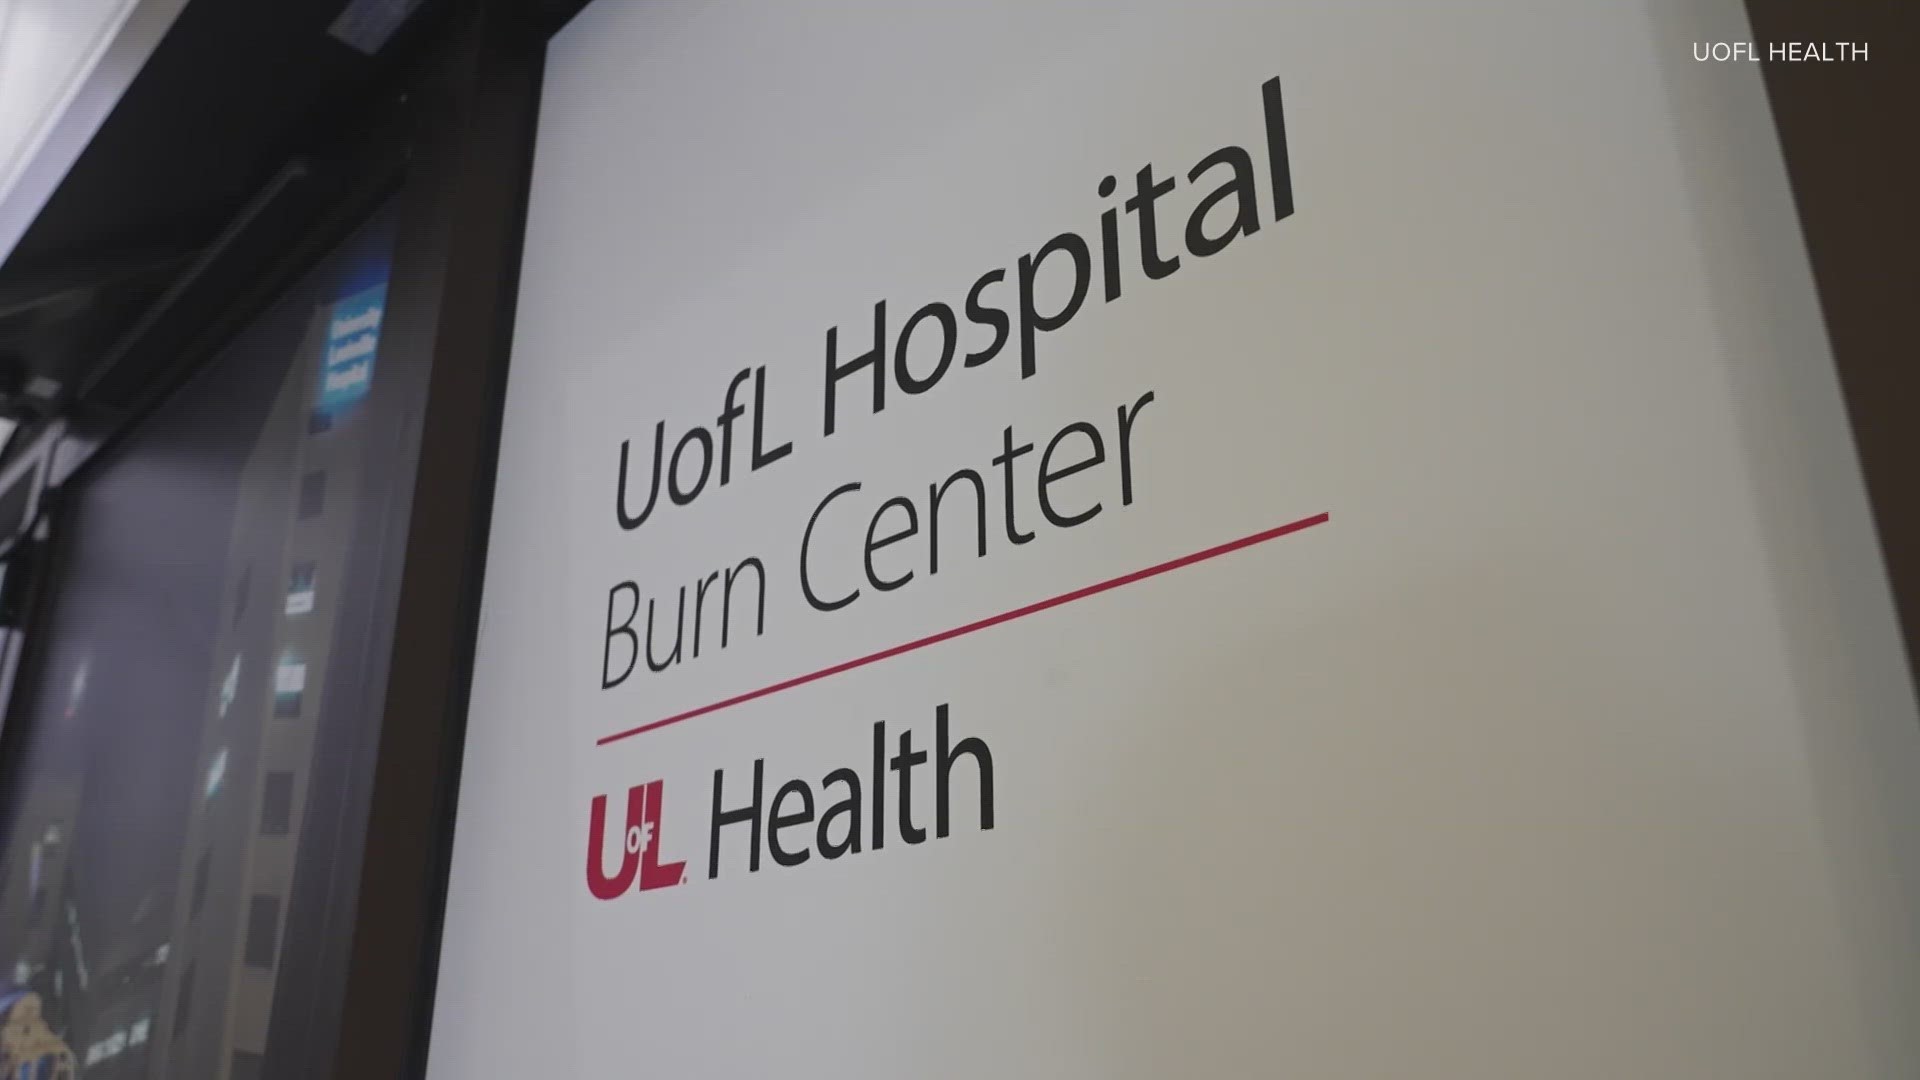 Since 1984, this hospital in Louisville has been operating the only burn center in The Commonwealth.